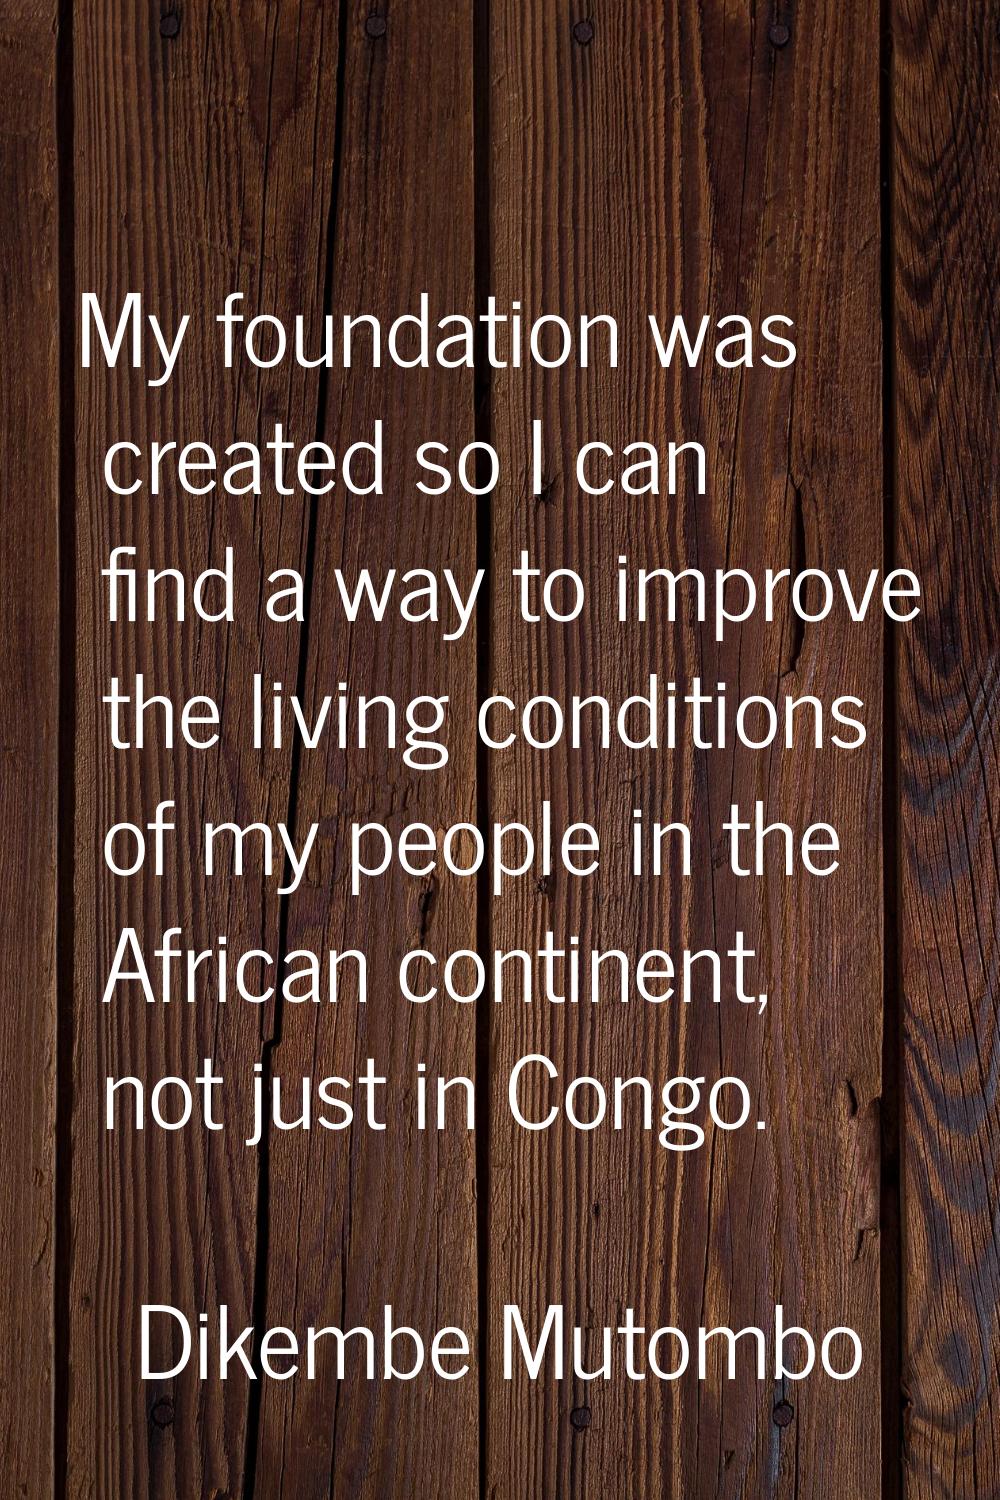 My foundation was created so I can find a way to improve the living conditions of my people in the 